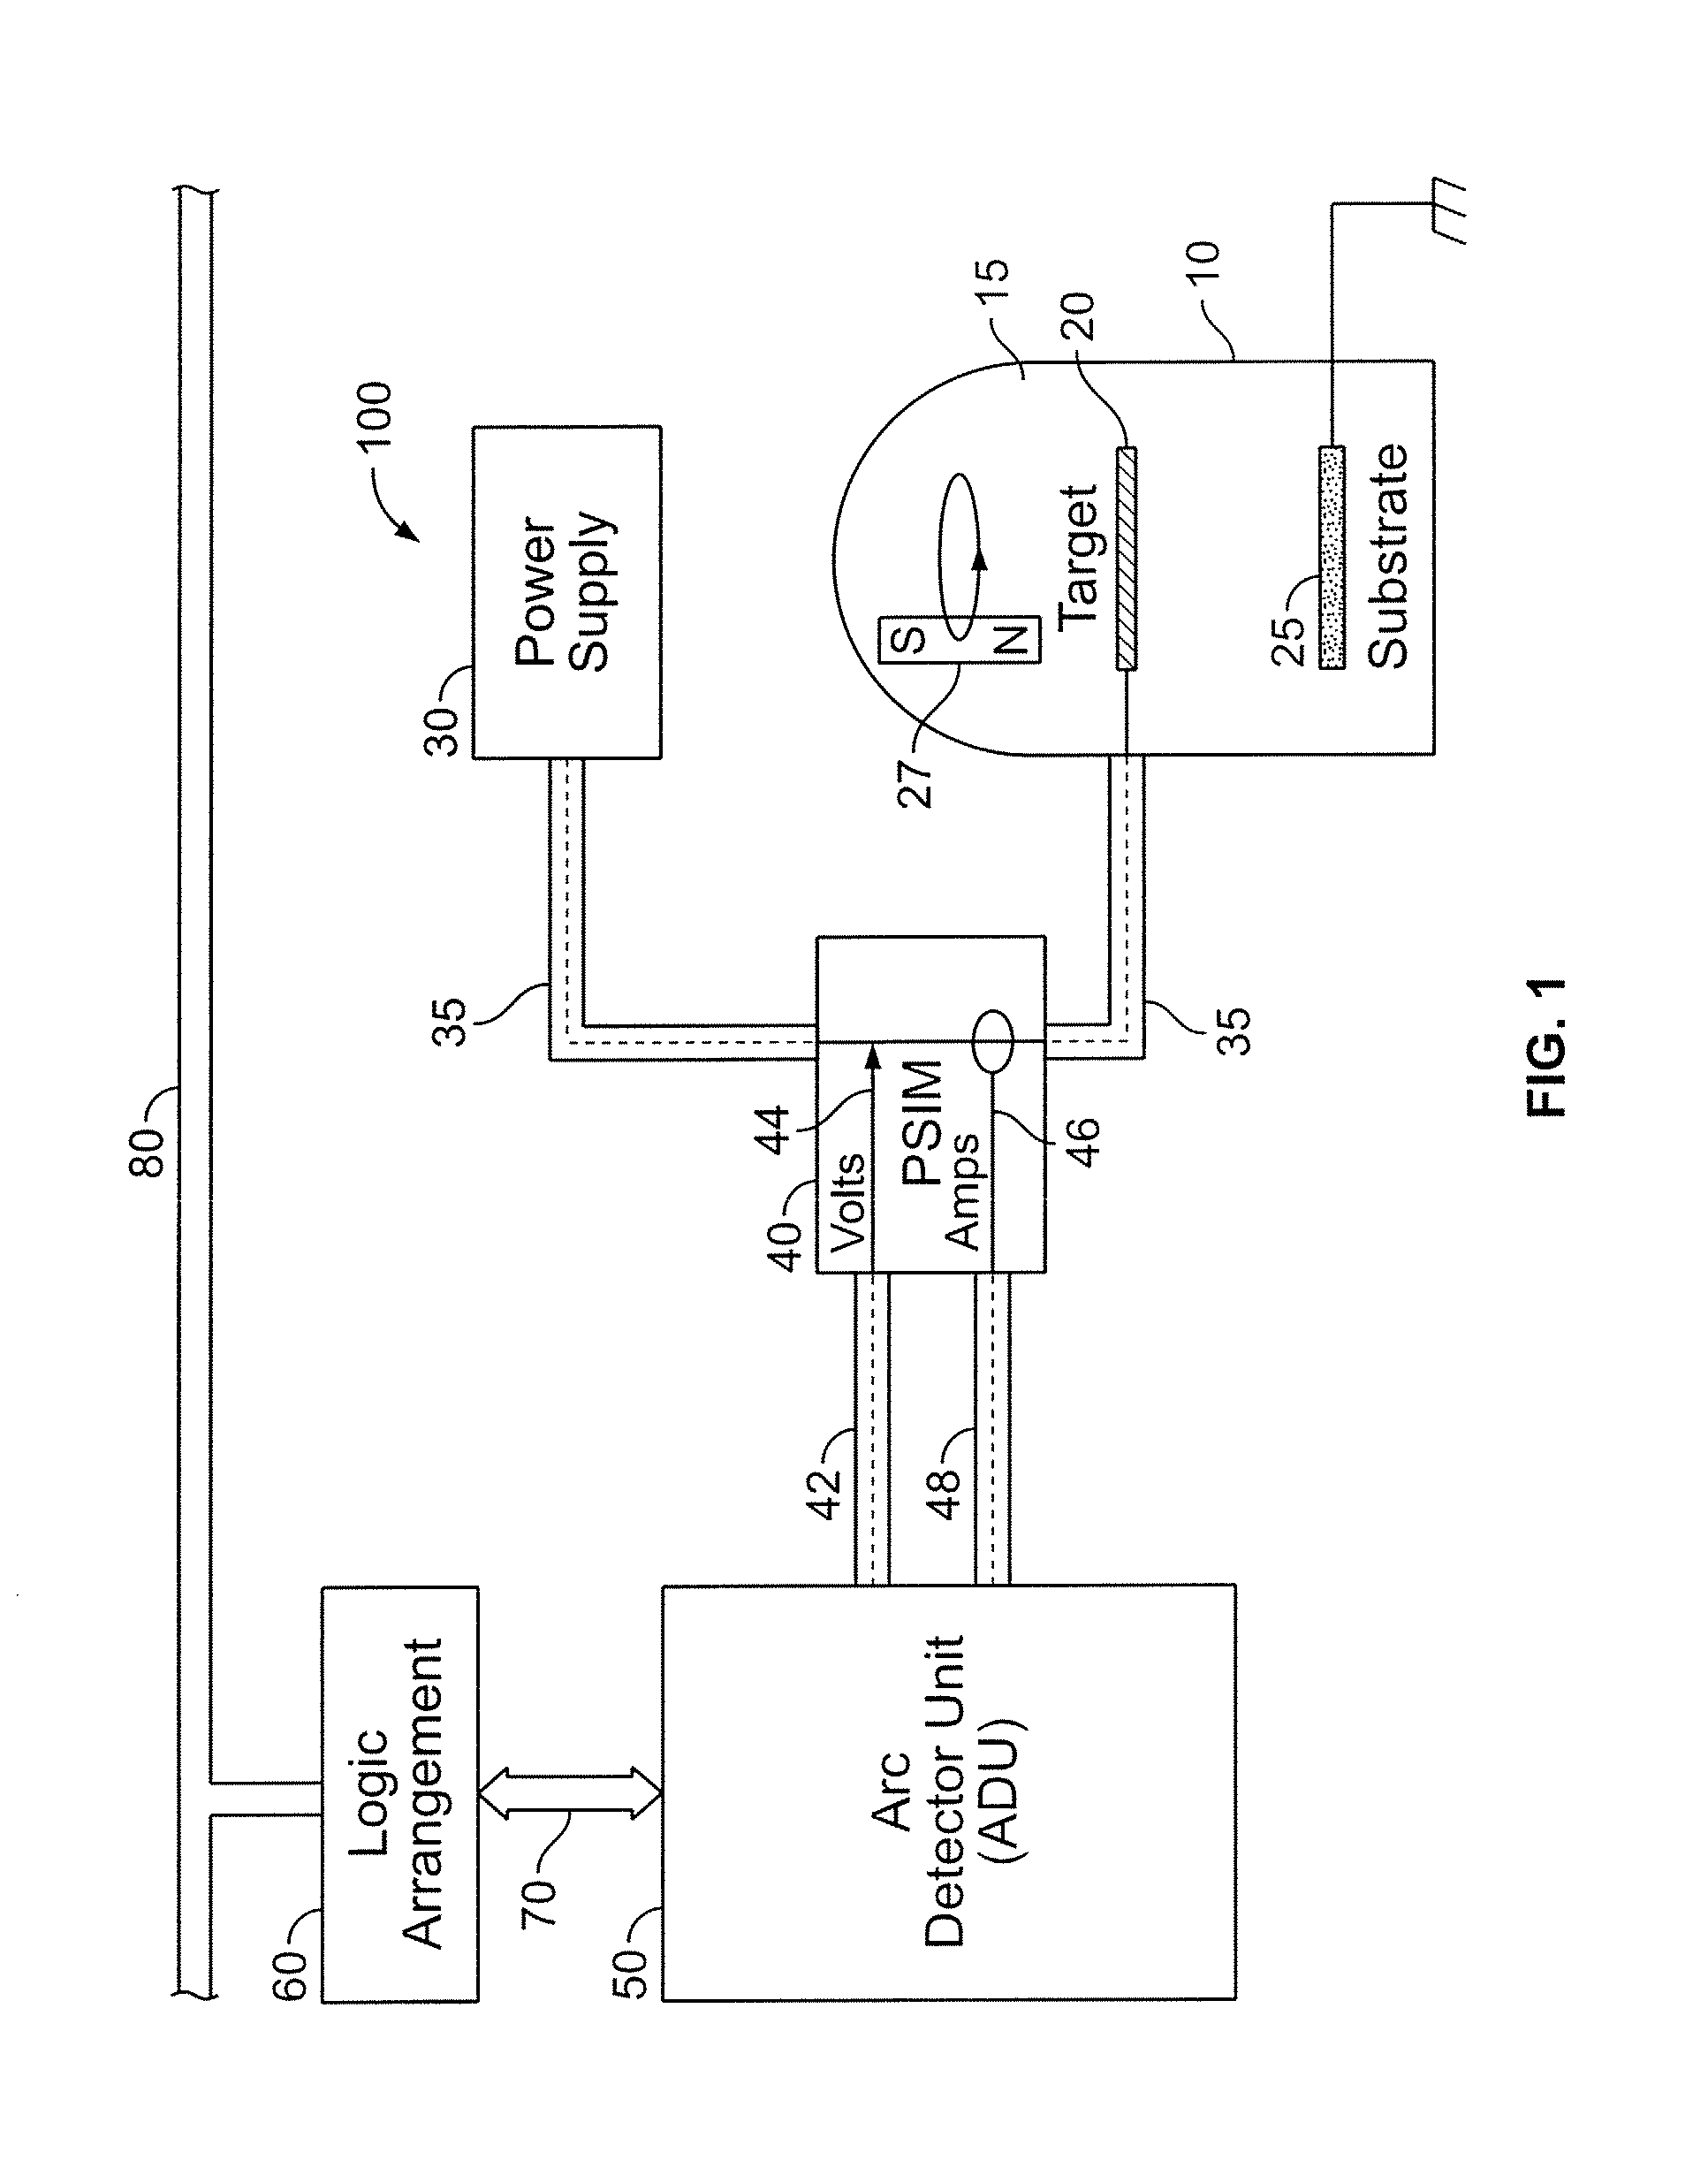 System and Method for Detecting Non-Cathode Arcing in a Plasma Generation Apparatus